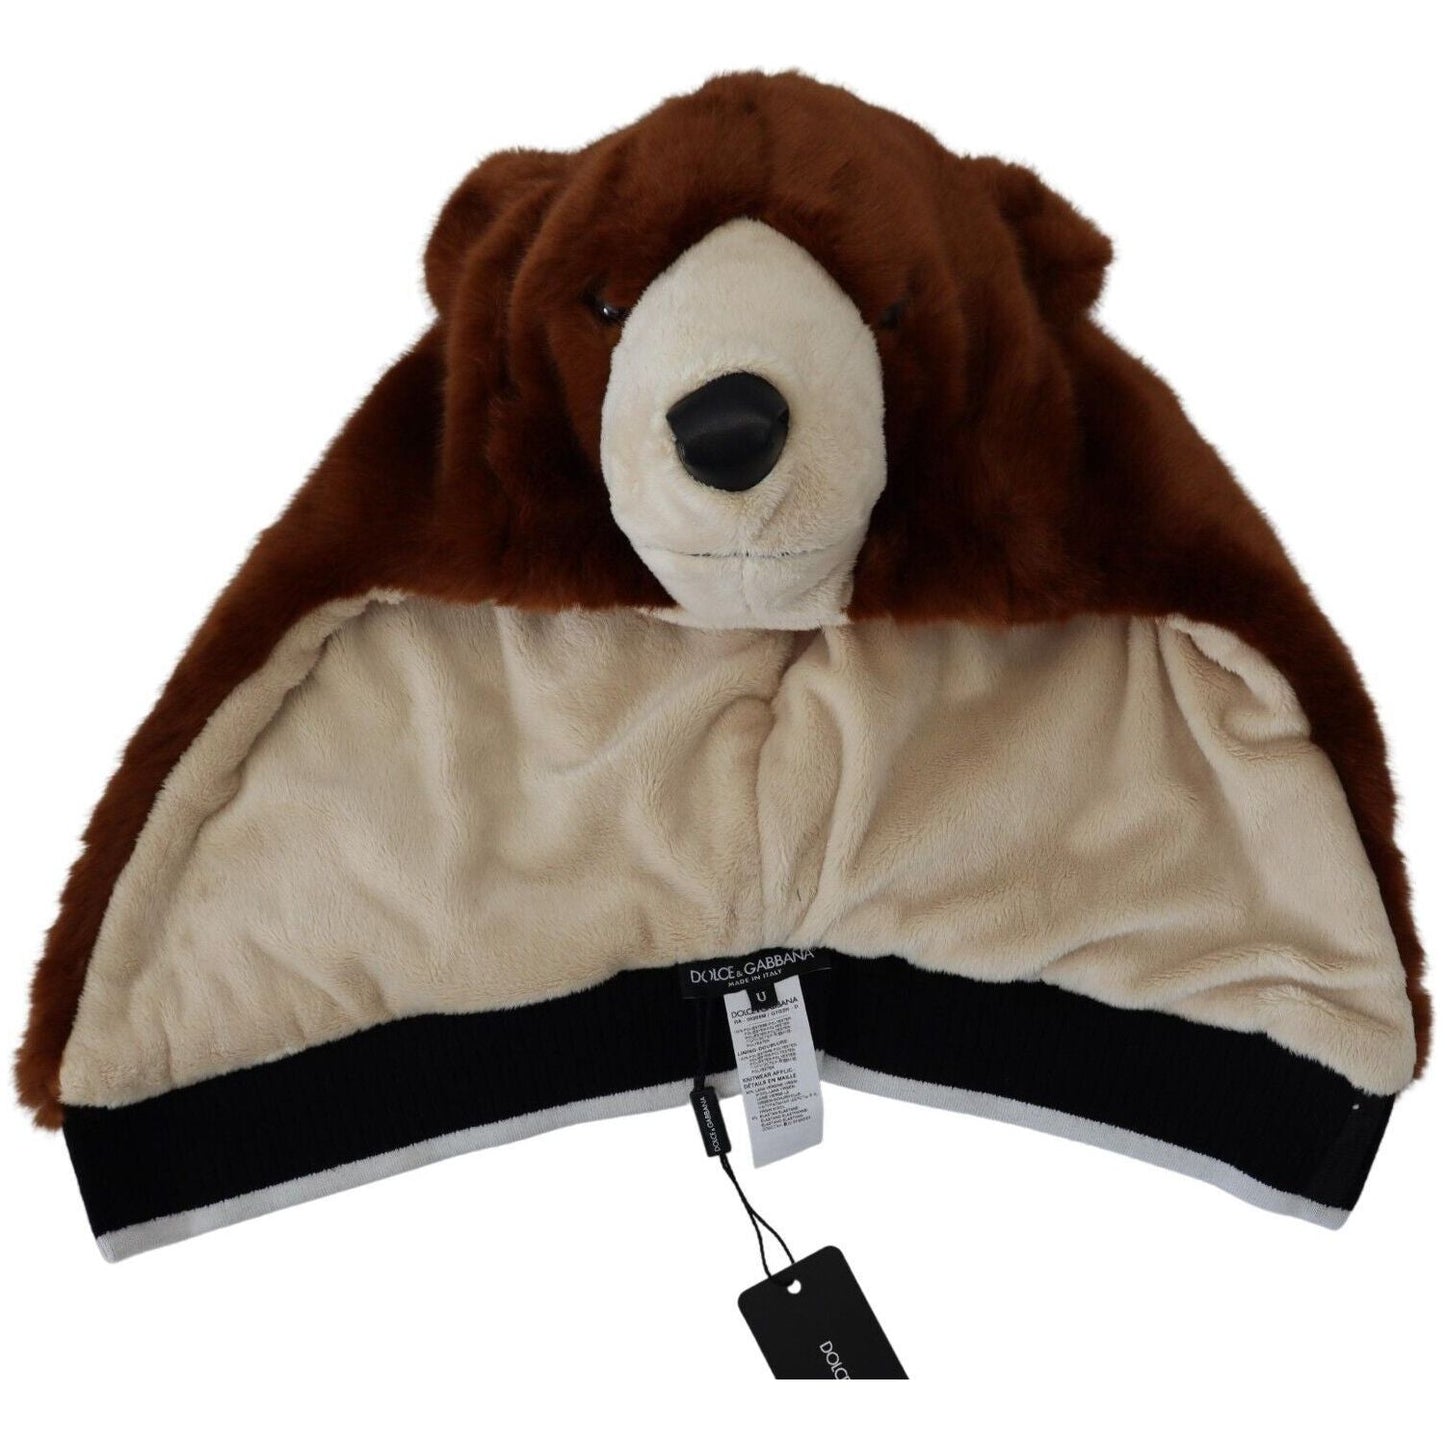 Dolce & Gabbana Elegant Whole Head Hat in Refined Brown Hue brown-bear-fur-whole-head-cap-one-size-polyester-hat